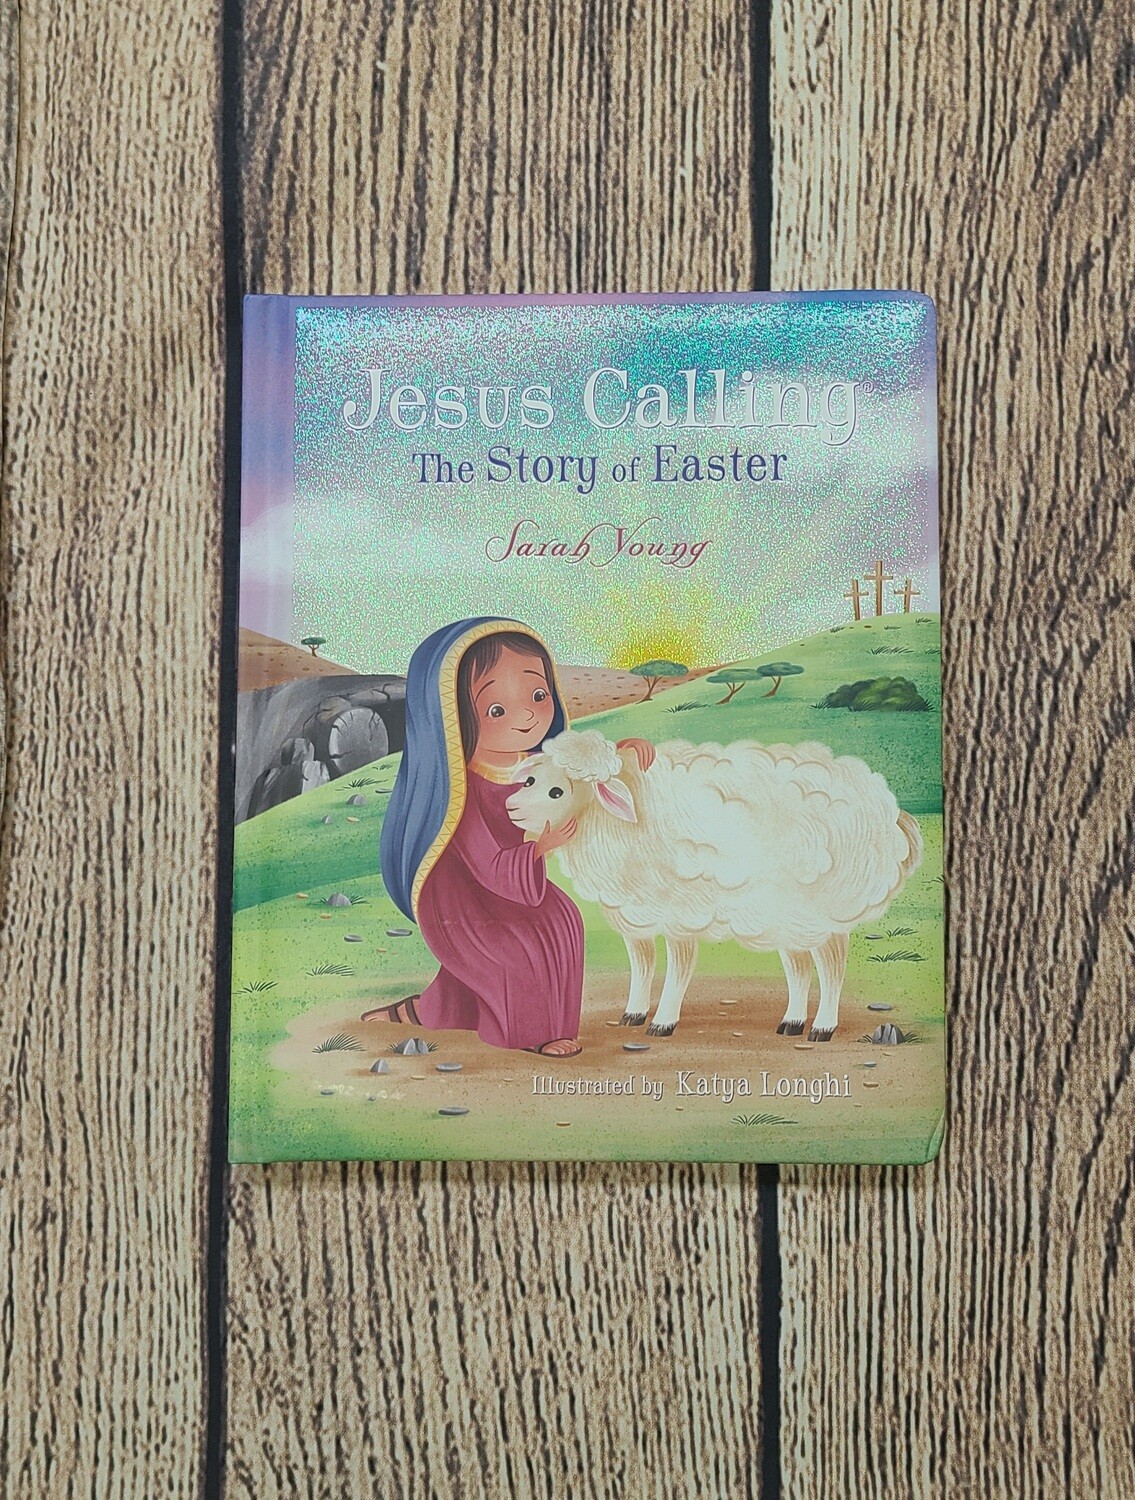 Jesus Calling: The Story of Easter by Sarah Young and Katya Longhi